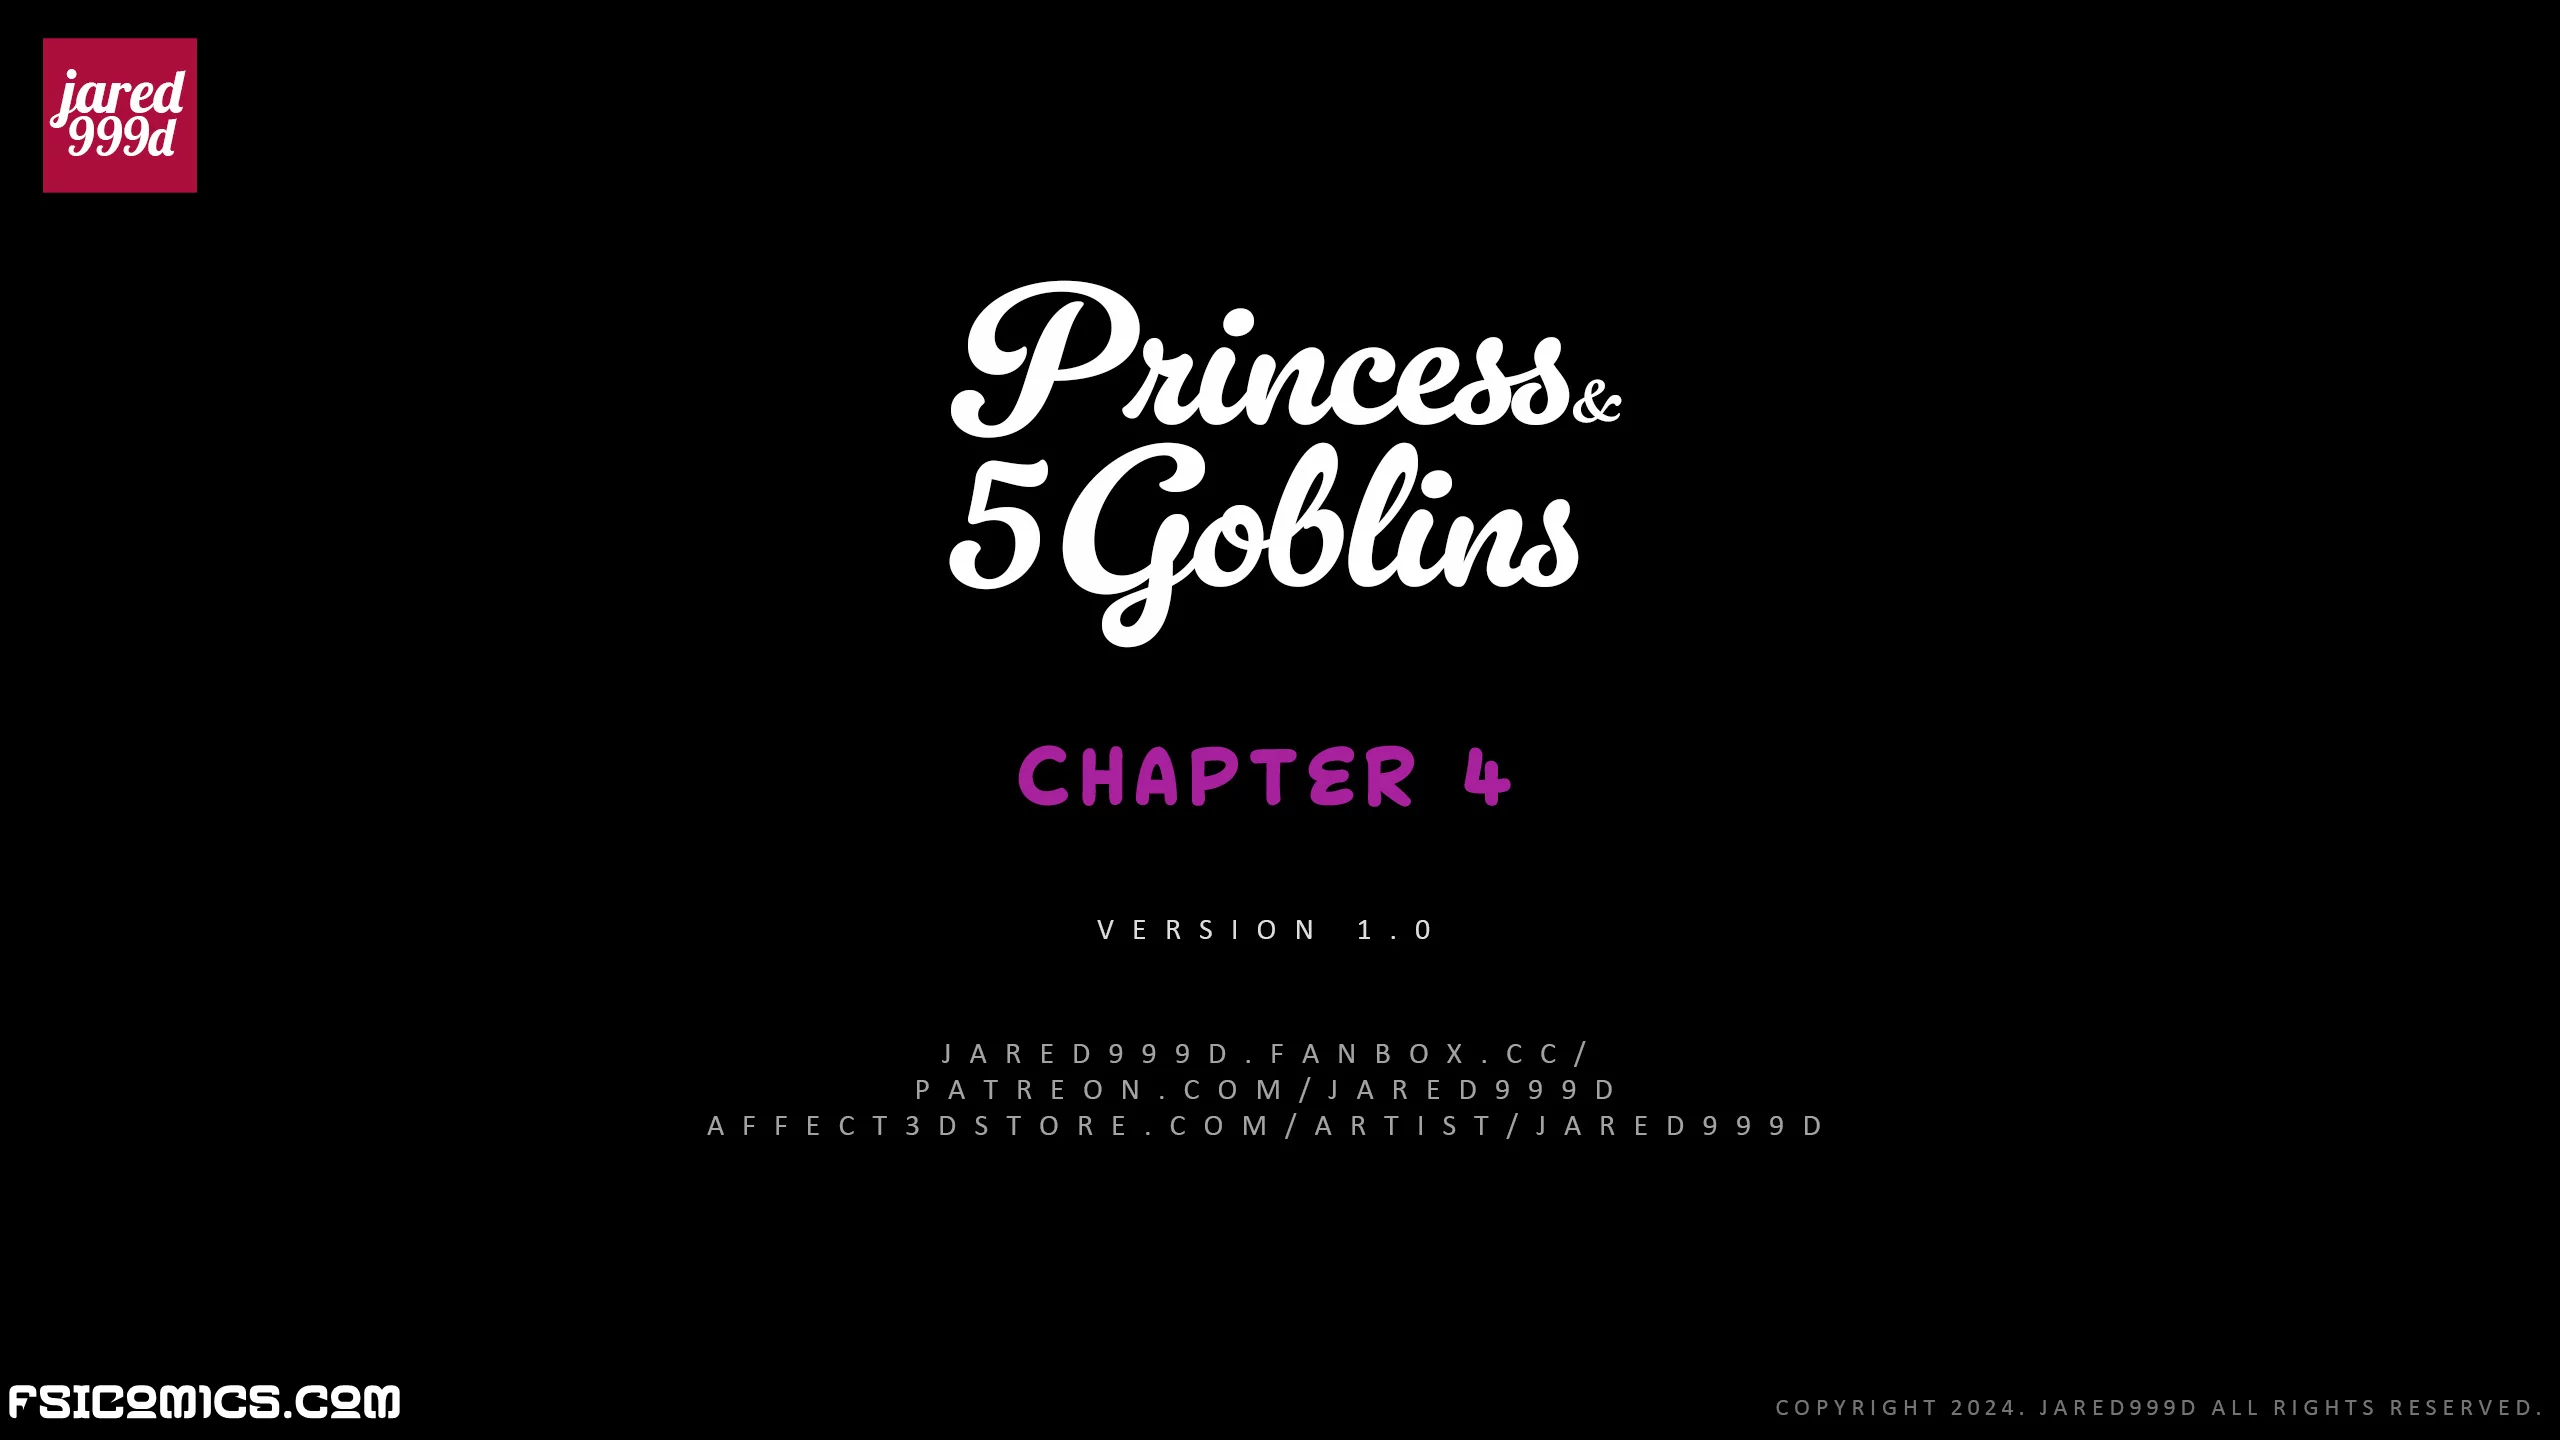 Princess And 5 Goblins Chapter 4 - Jared999D - 227 - FSIComics